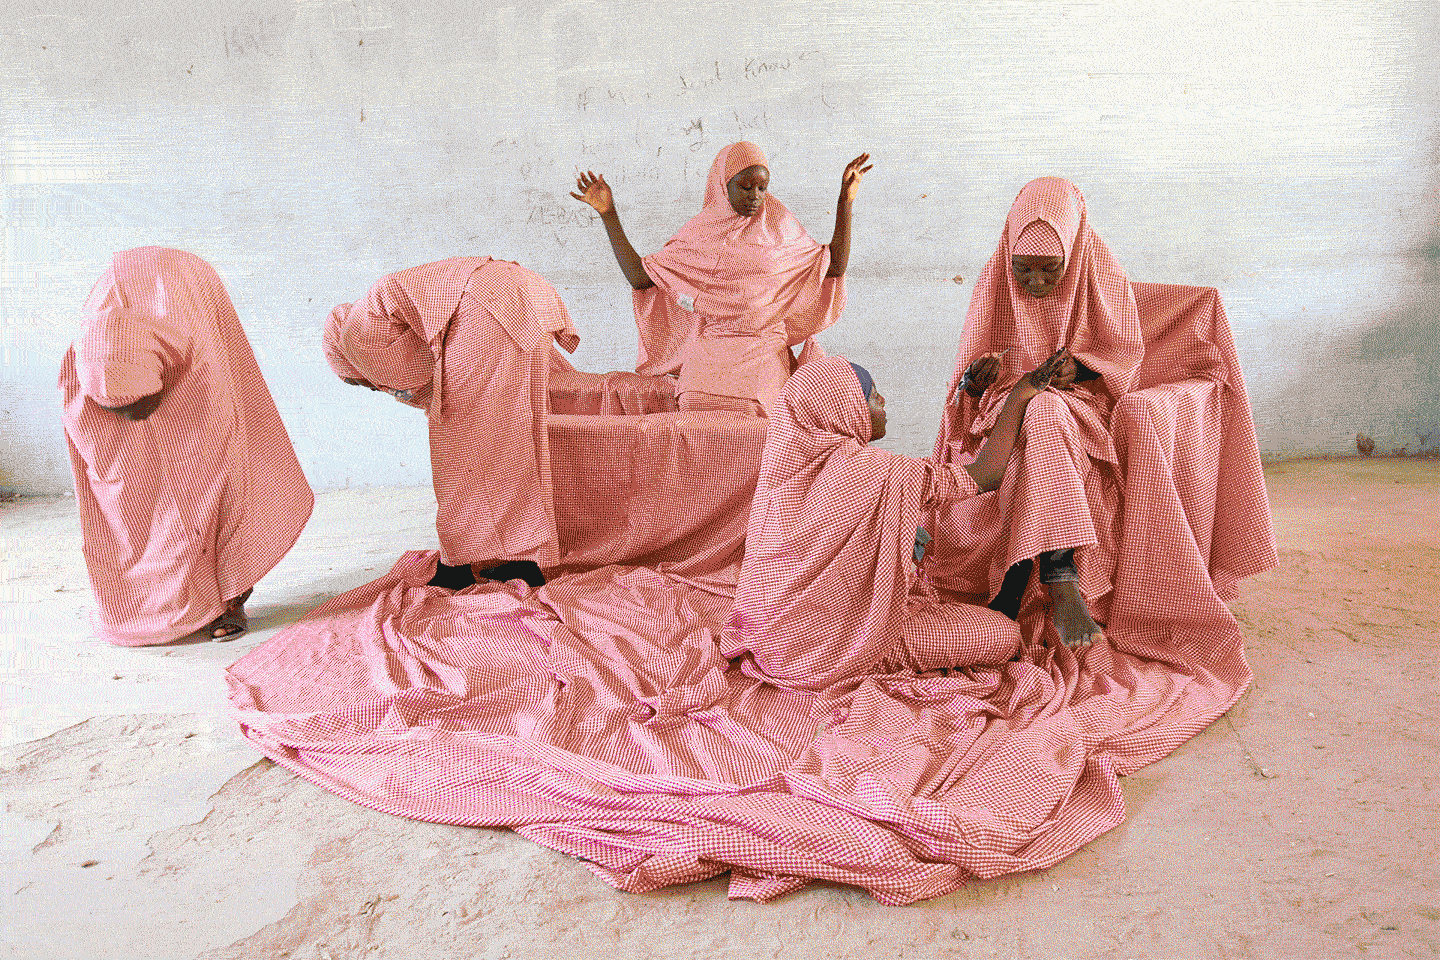 	[1] Rahima Gambo, Doing Lalle in a classroom, 2019. From the series “Tatsuniya II.” Courtesy of the artist. [2] Niklas Lichti, Concrete Quarterly (still), 2020. Courtesy of the artist and Galerie Emanuel Layr, Vienna. [3] Henry Joseph Darger, Untitled, unknown date, Courtesy Karin and Gerhard Dammann, Switzerland. [4] Laila Bachtiar, Ein Wolf [A Wolf], 2016. Courtesy of Hannah Rieger Collection. © gallery gugging. [5] Yesmine Ben Khelil, Tout devient rose ... 3 (Everything Becomes Pink ... 3), 2020. Courtesy of the artist and Galerie Maïa Muller, Paris. [6] Tony Cokes, Testament A: MF FKA K-P X KE RIP (still), 2019. Courtesy of the artist, Greene Naftali, New York, Hannah Hoffman, Los Angeles, and Electronic Arts Intermix, New York.